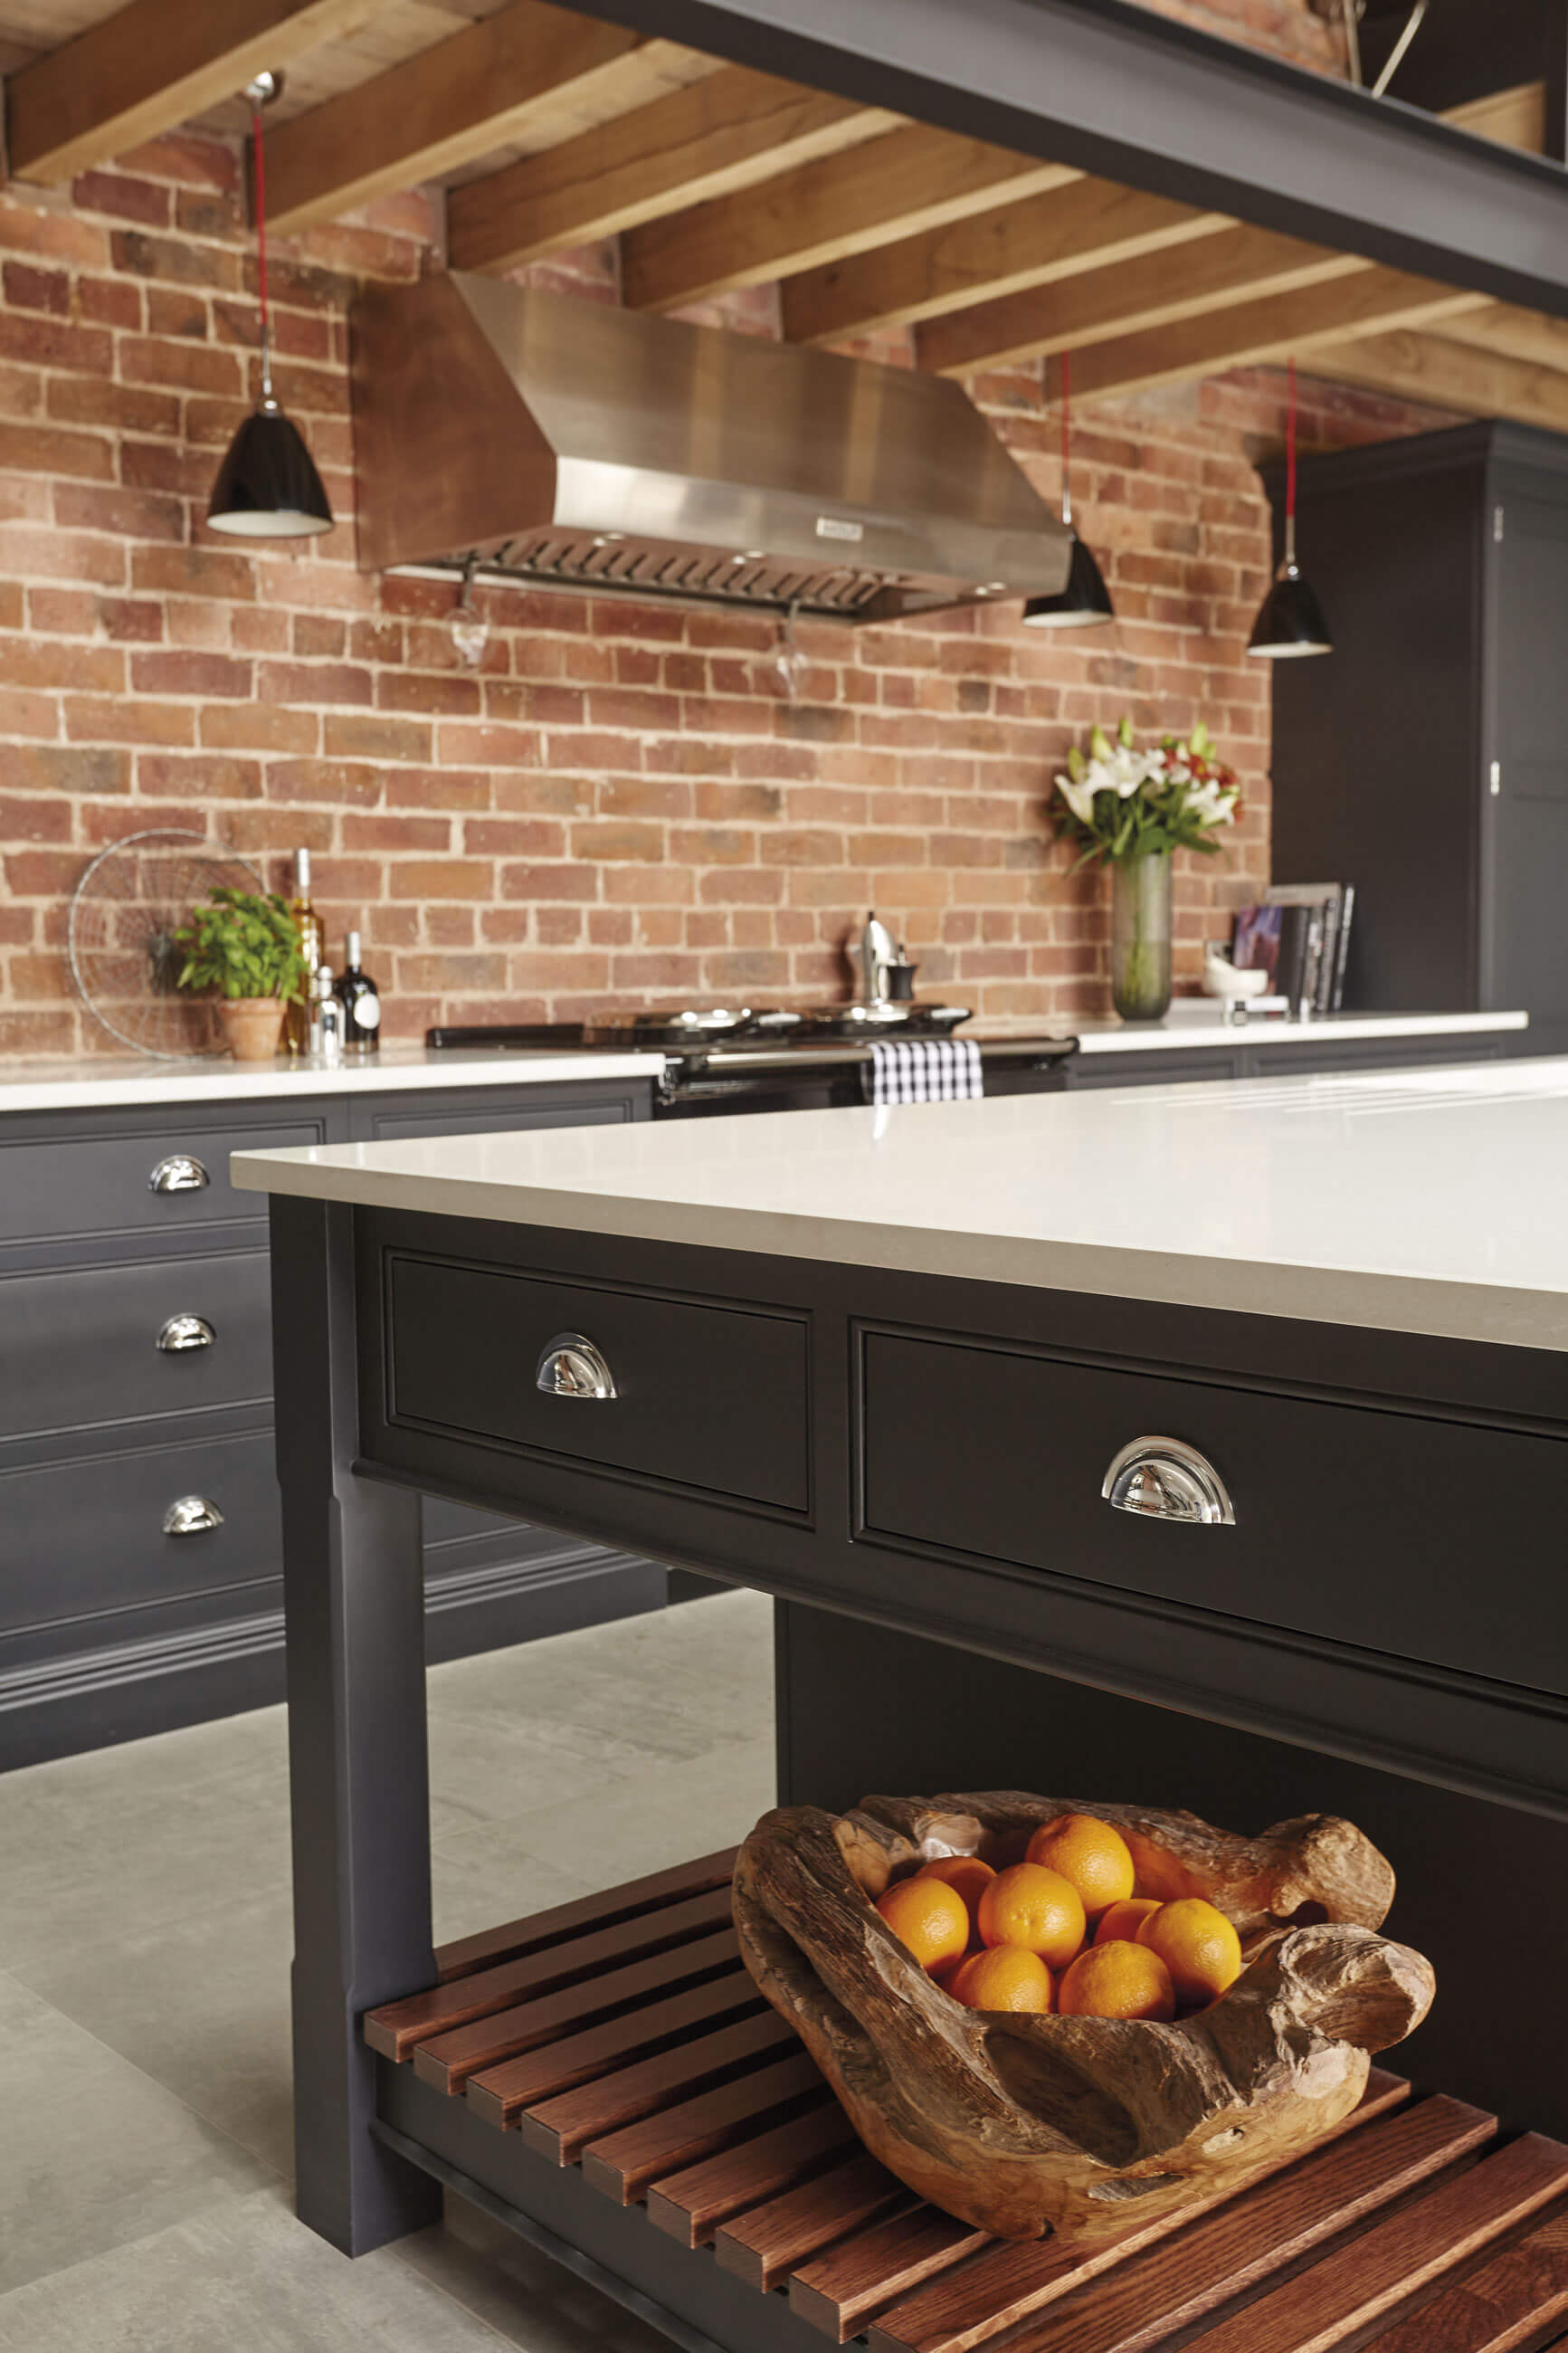 Industrial Style Kitchen Tom Howley